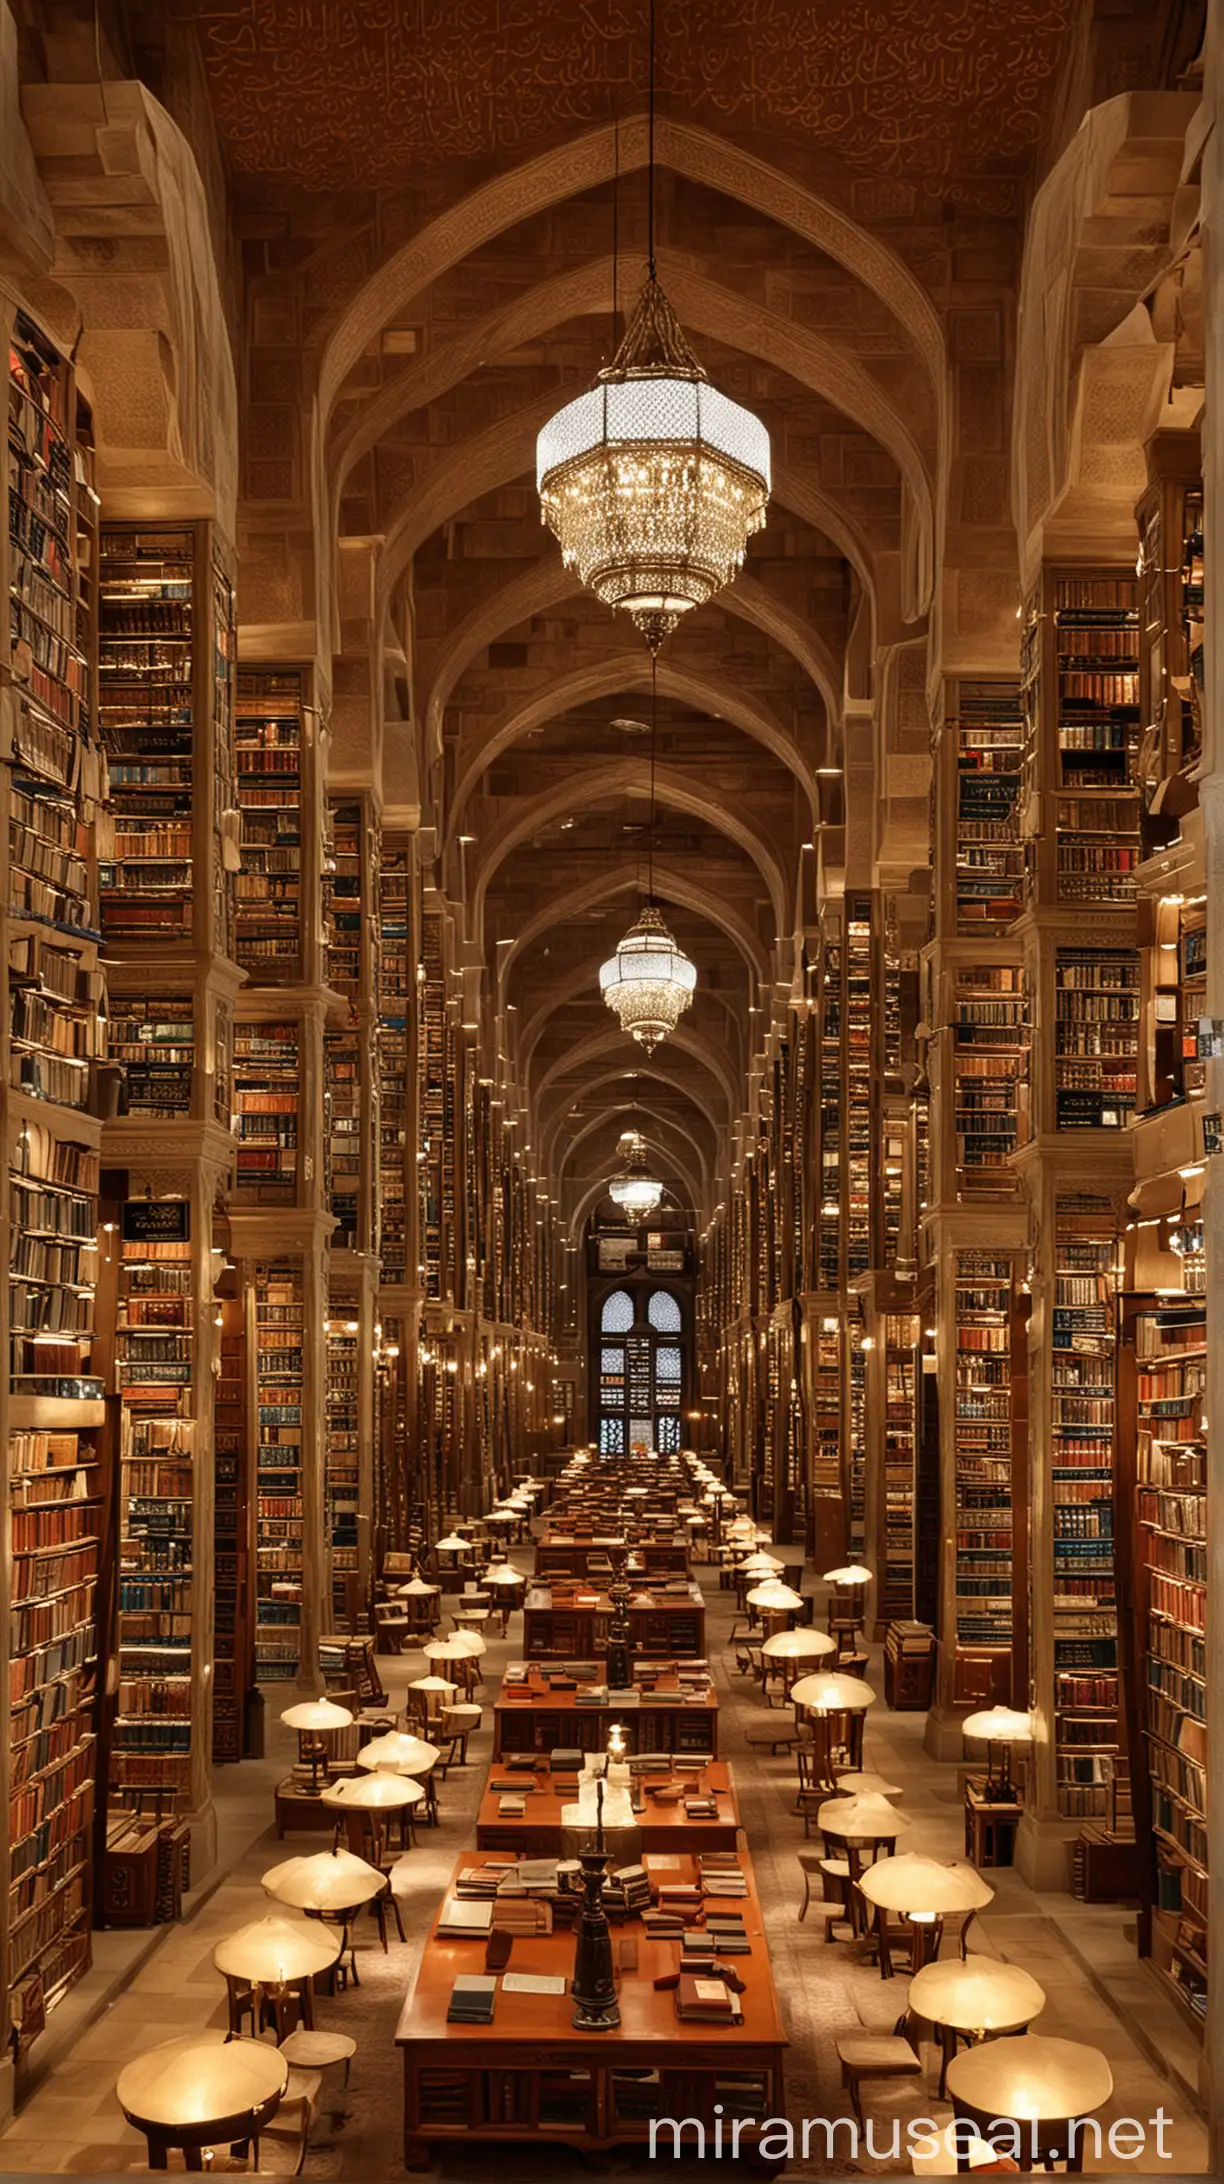 Islamic Scholars Studying in Magnificent Library